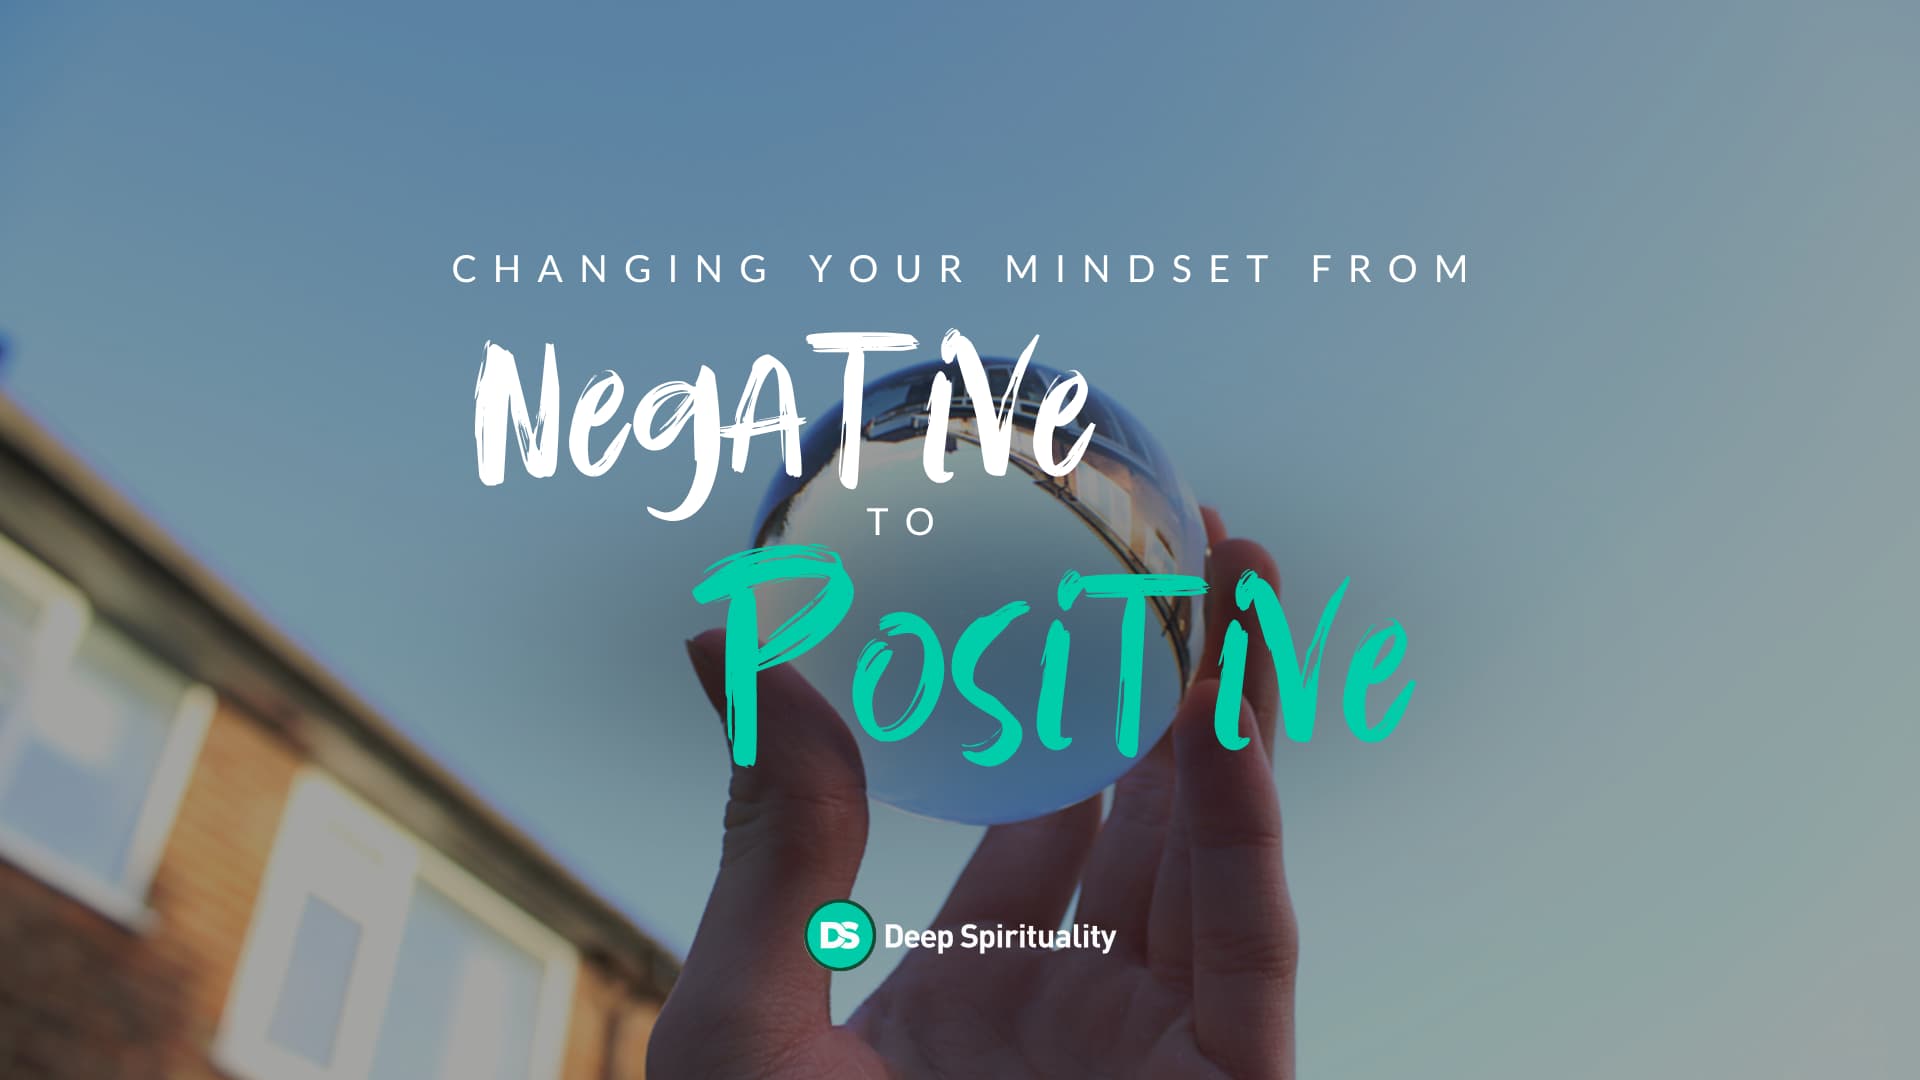 Changing Your Mindset From Negative to Positive  2